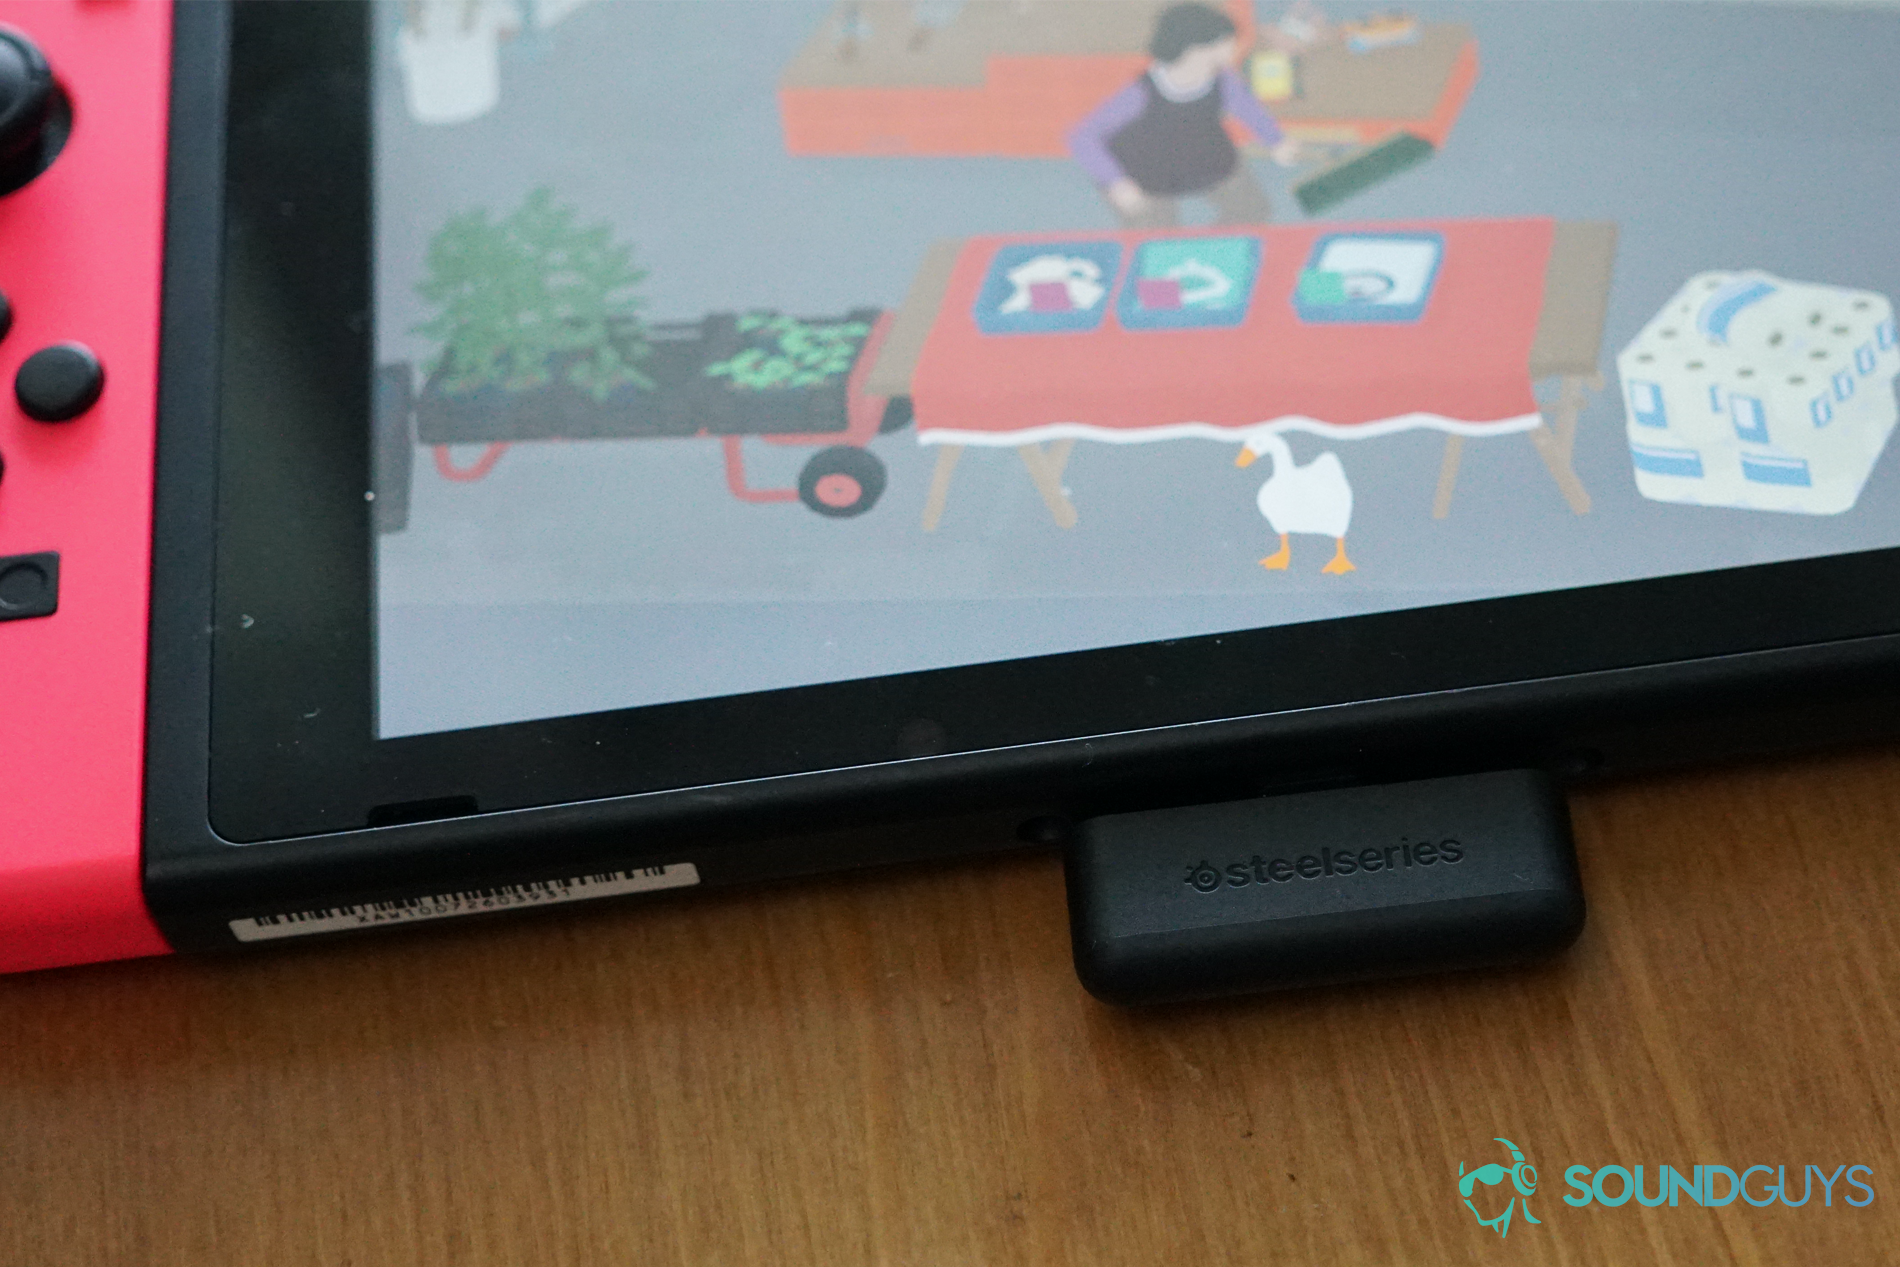 The SteelSeries Arctis 1 Wireless dongle is plugged into a Nintendo Switch running Untitled Goose Game.